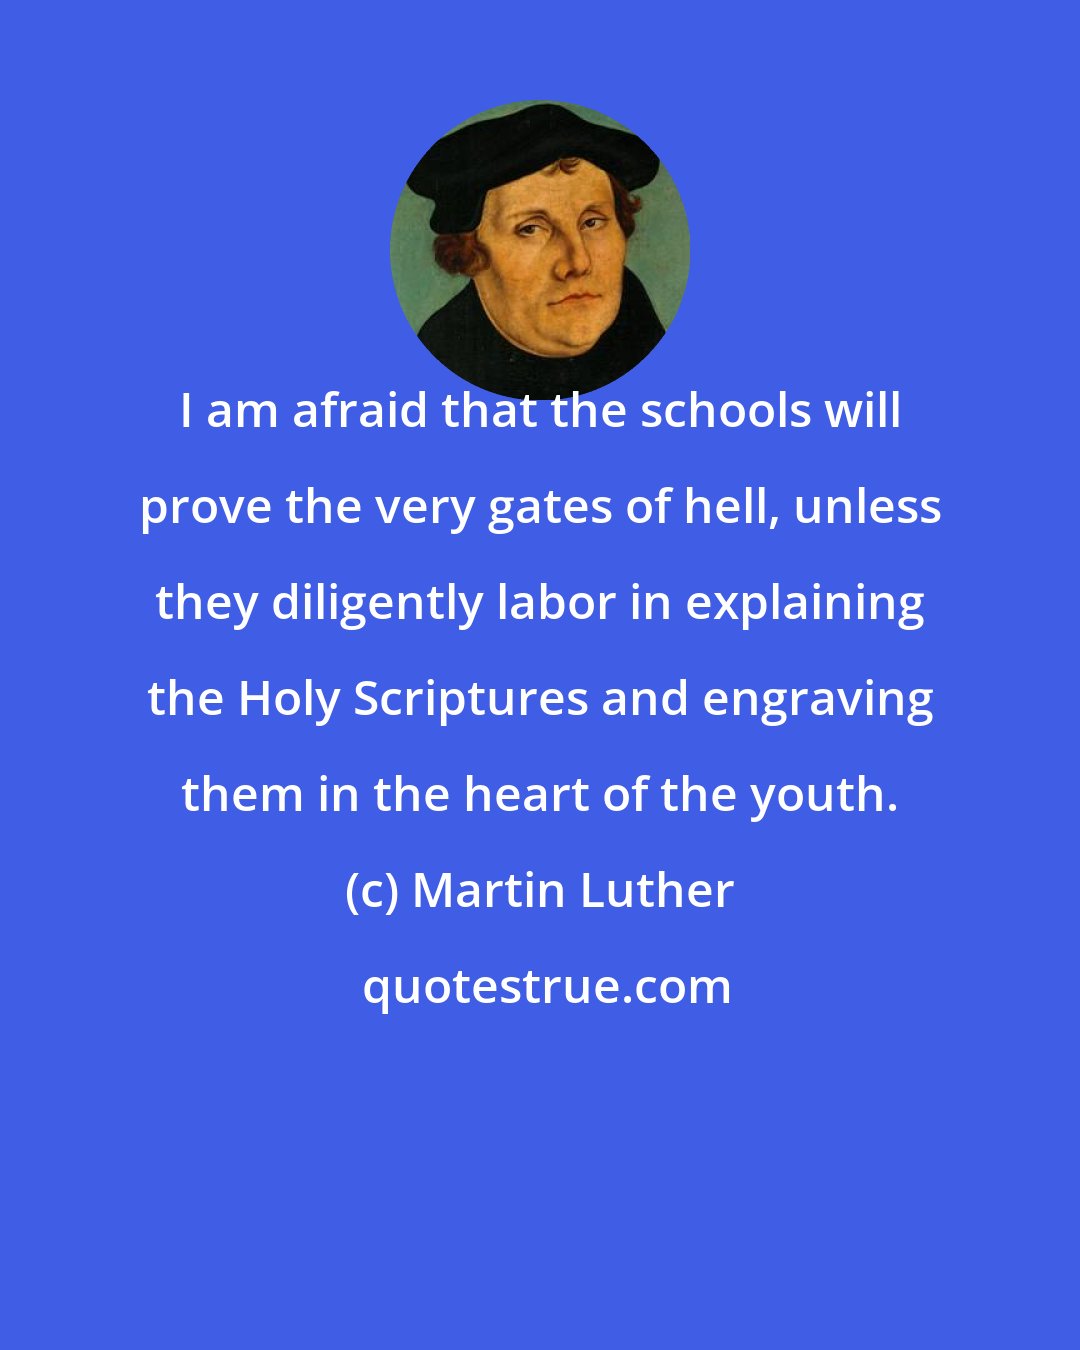 Martin Luther: I am afraid that the schools will prove the very gates of hell, unless they diligently labor in explaining the Holy Scriptures and engraving them in the heart of the youth.